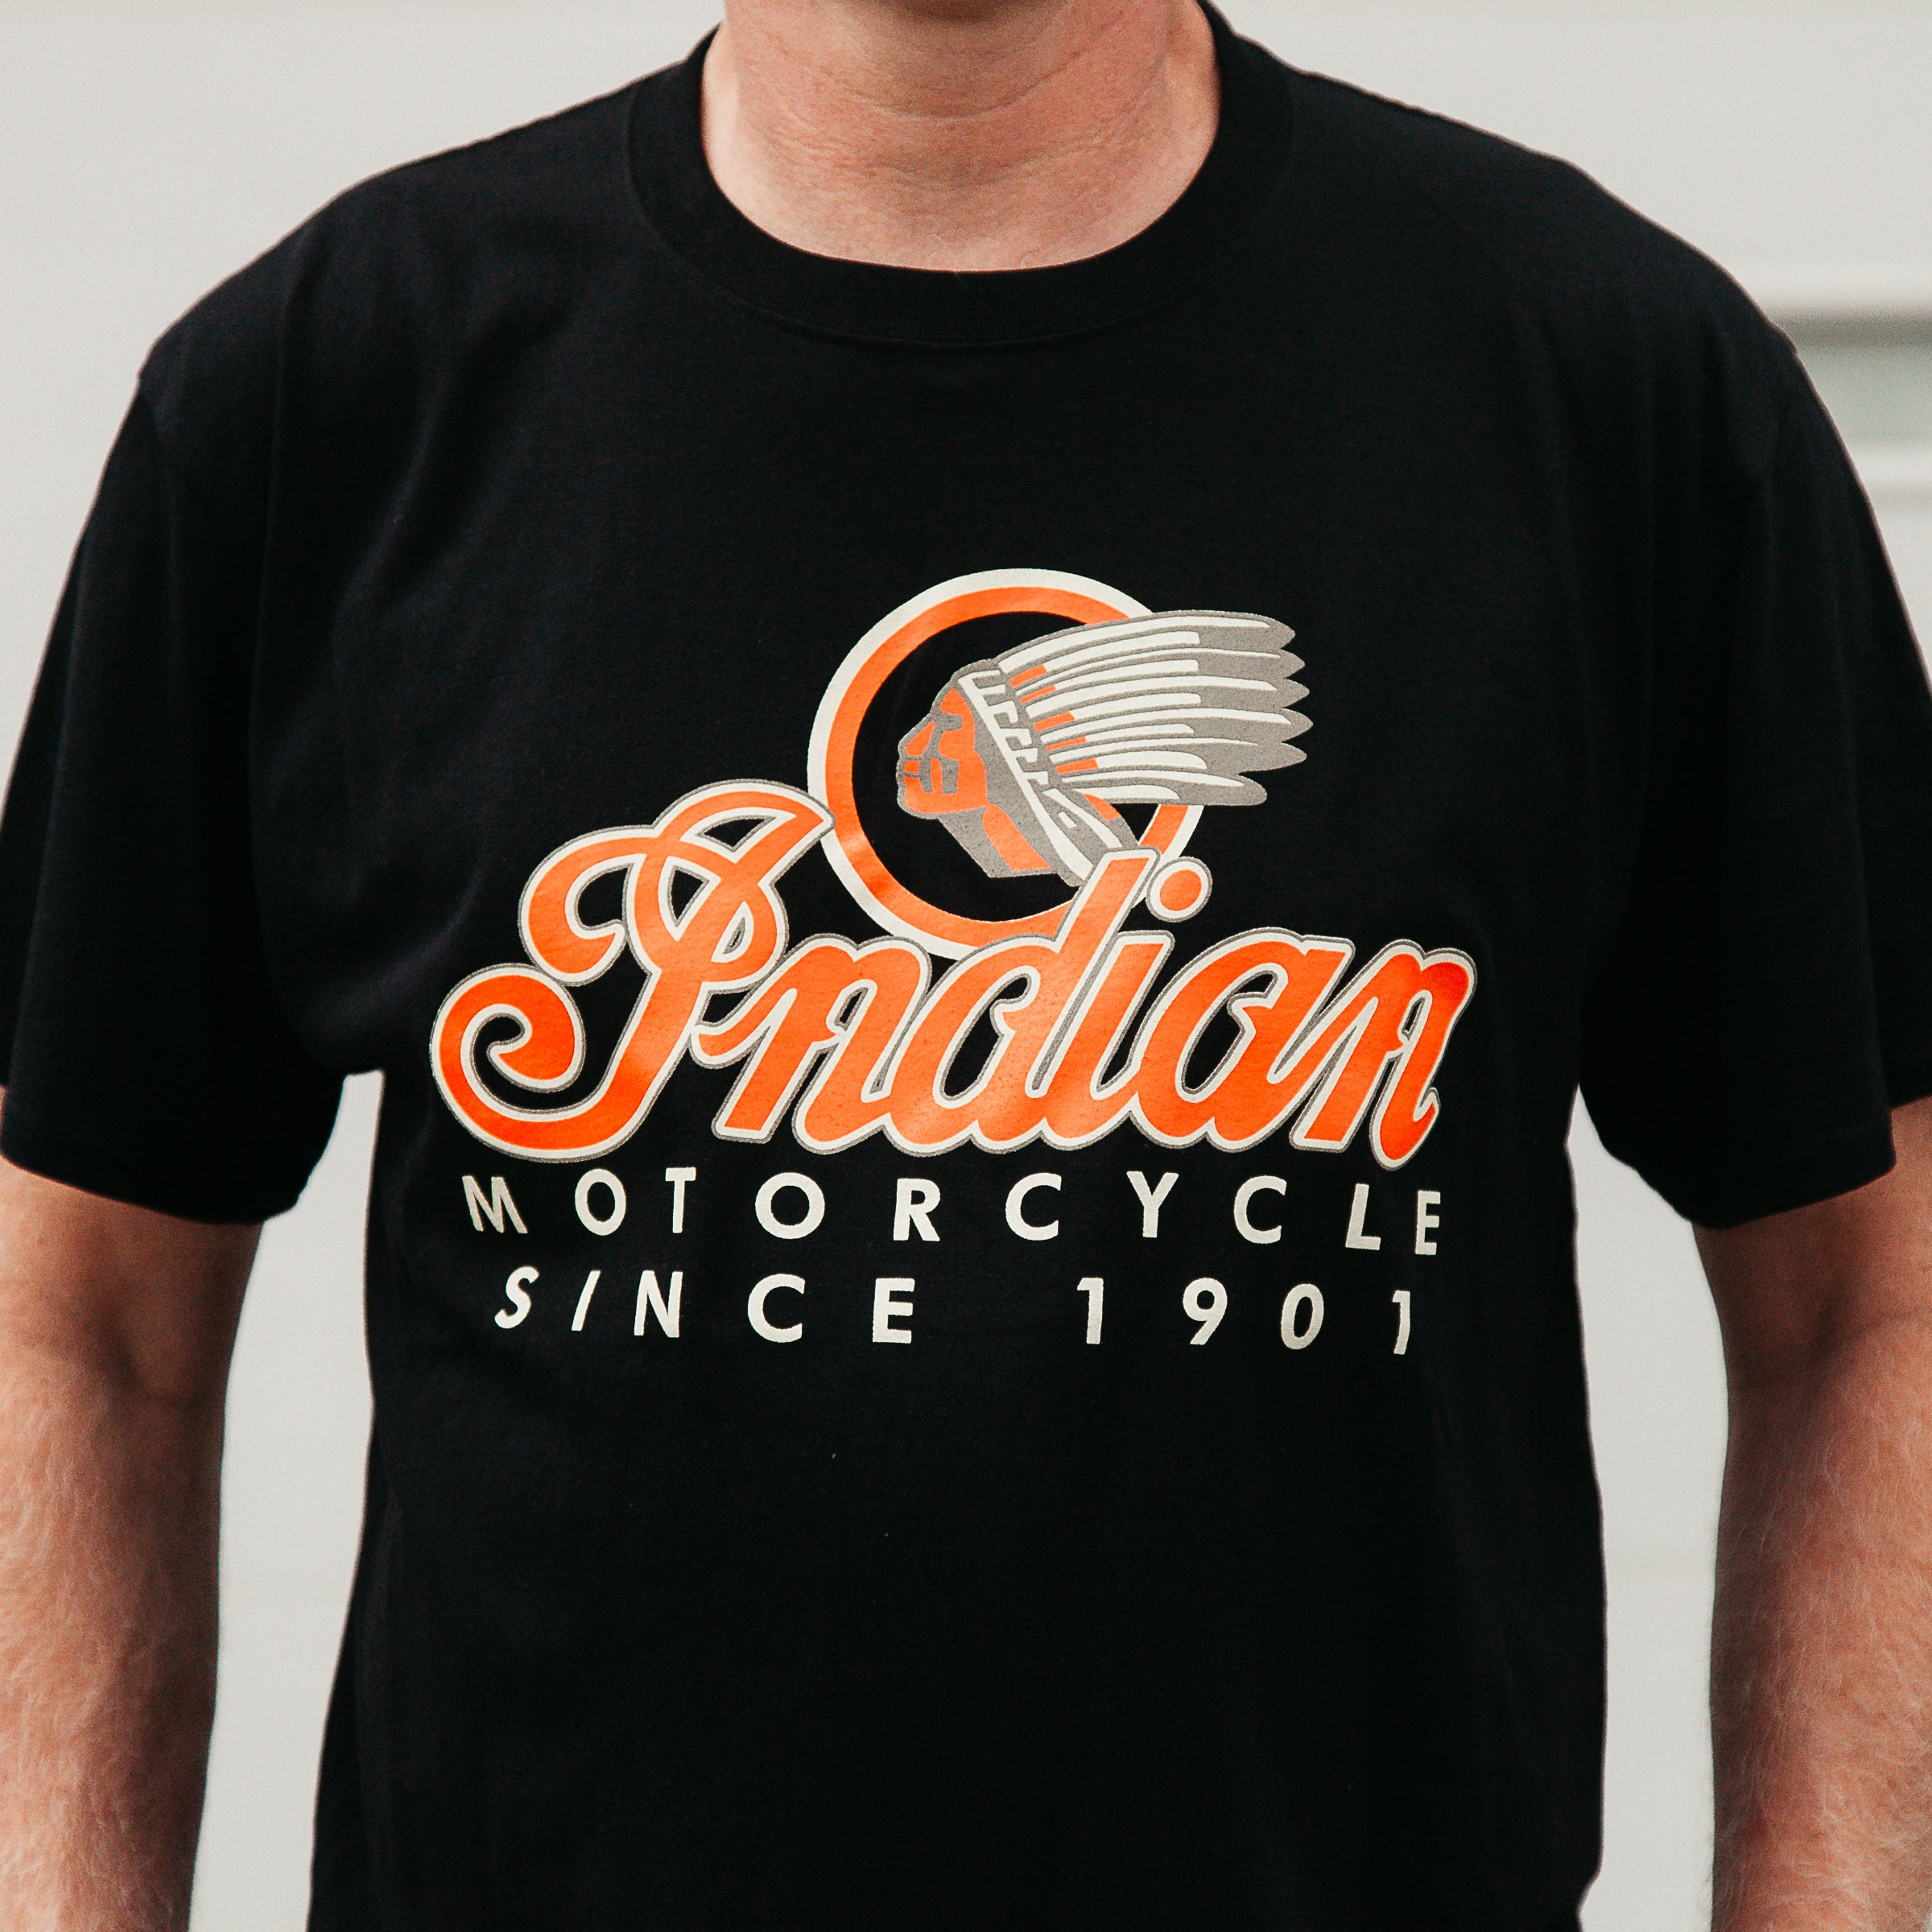 Dreamcycle Motorcycle Museum |  Closeup photo of Indian Motorcycle Tshirt in lifestyle environment.